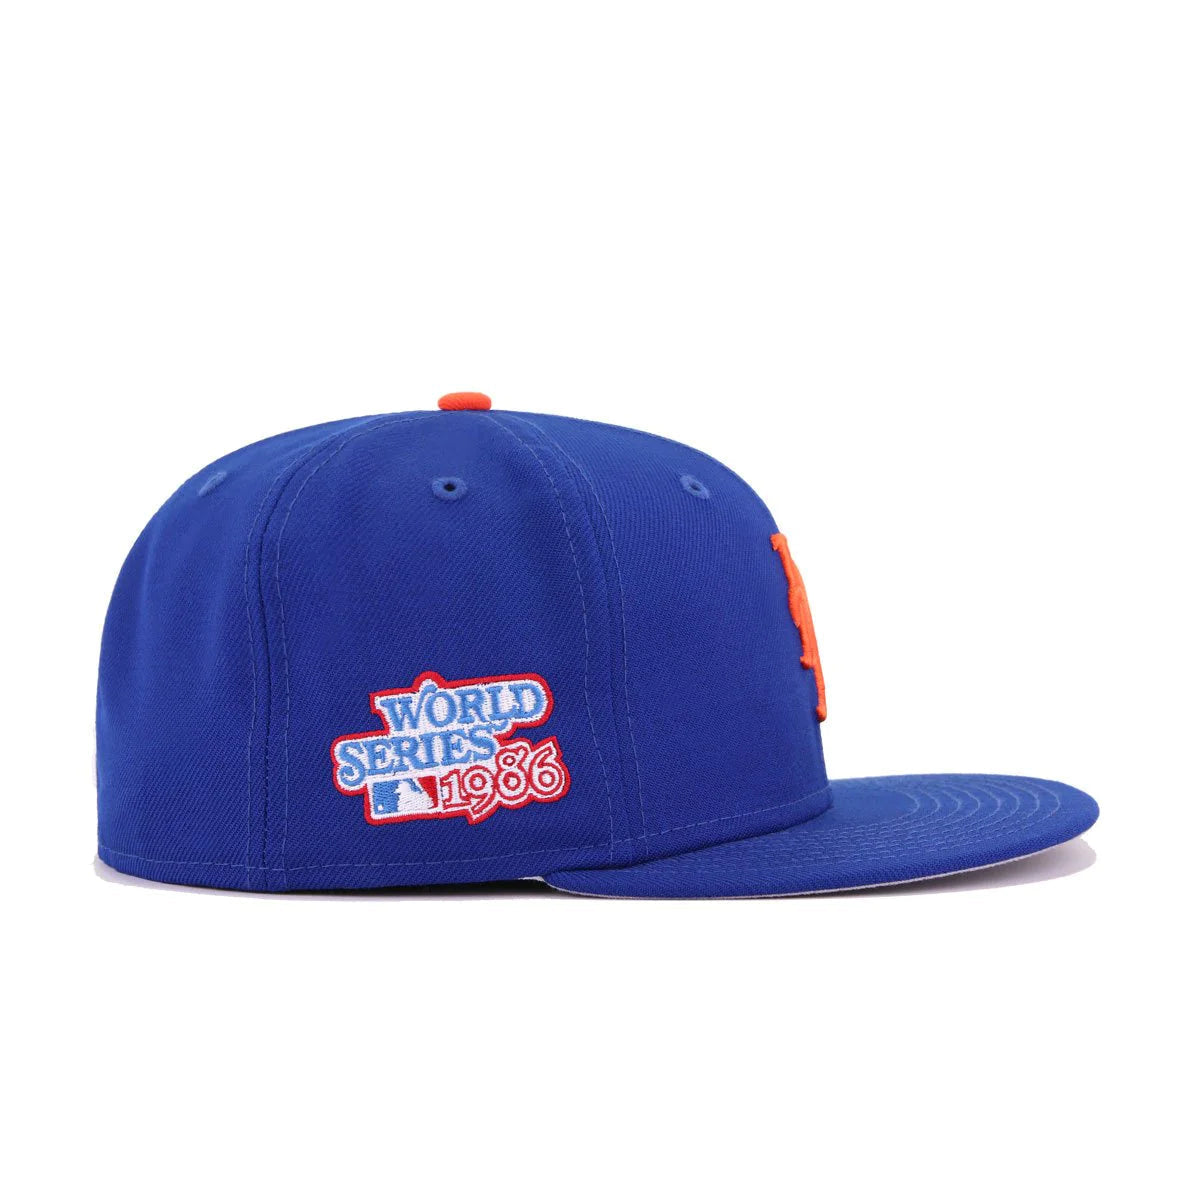 New Era 59FIFTY New York Mets 1986 World Series Side Patch Fitted